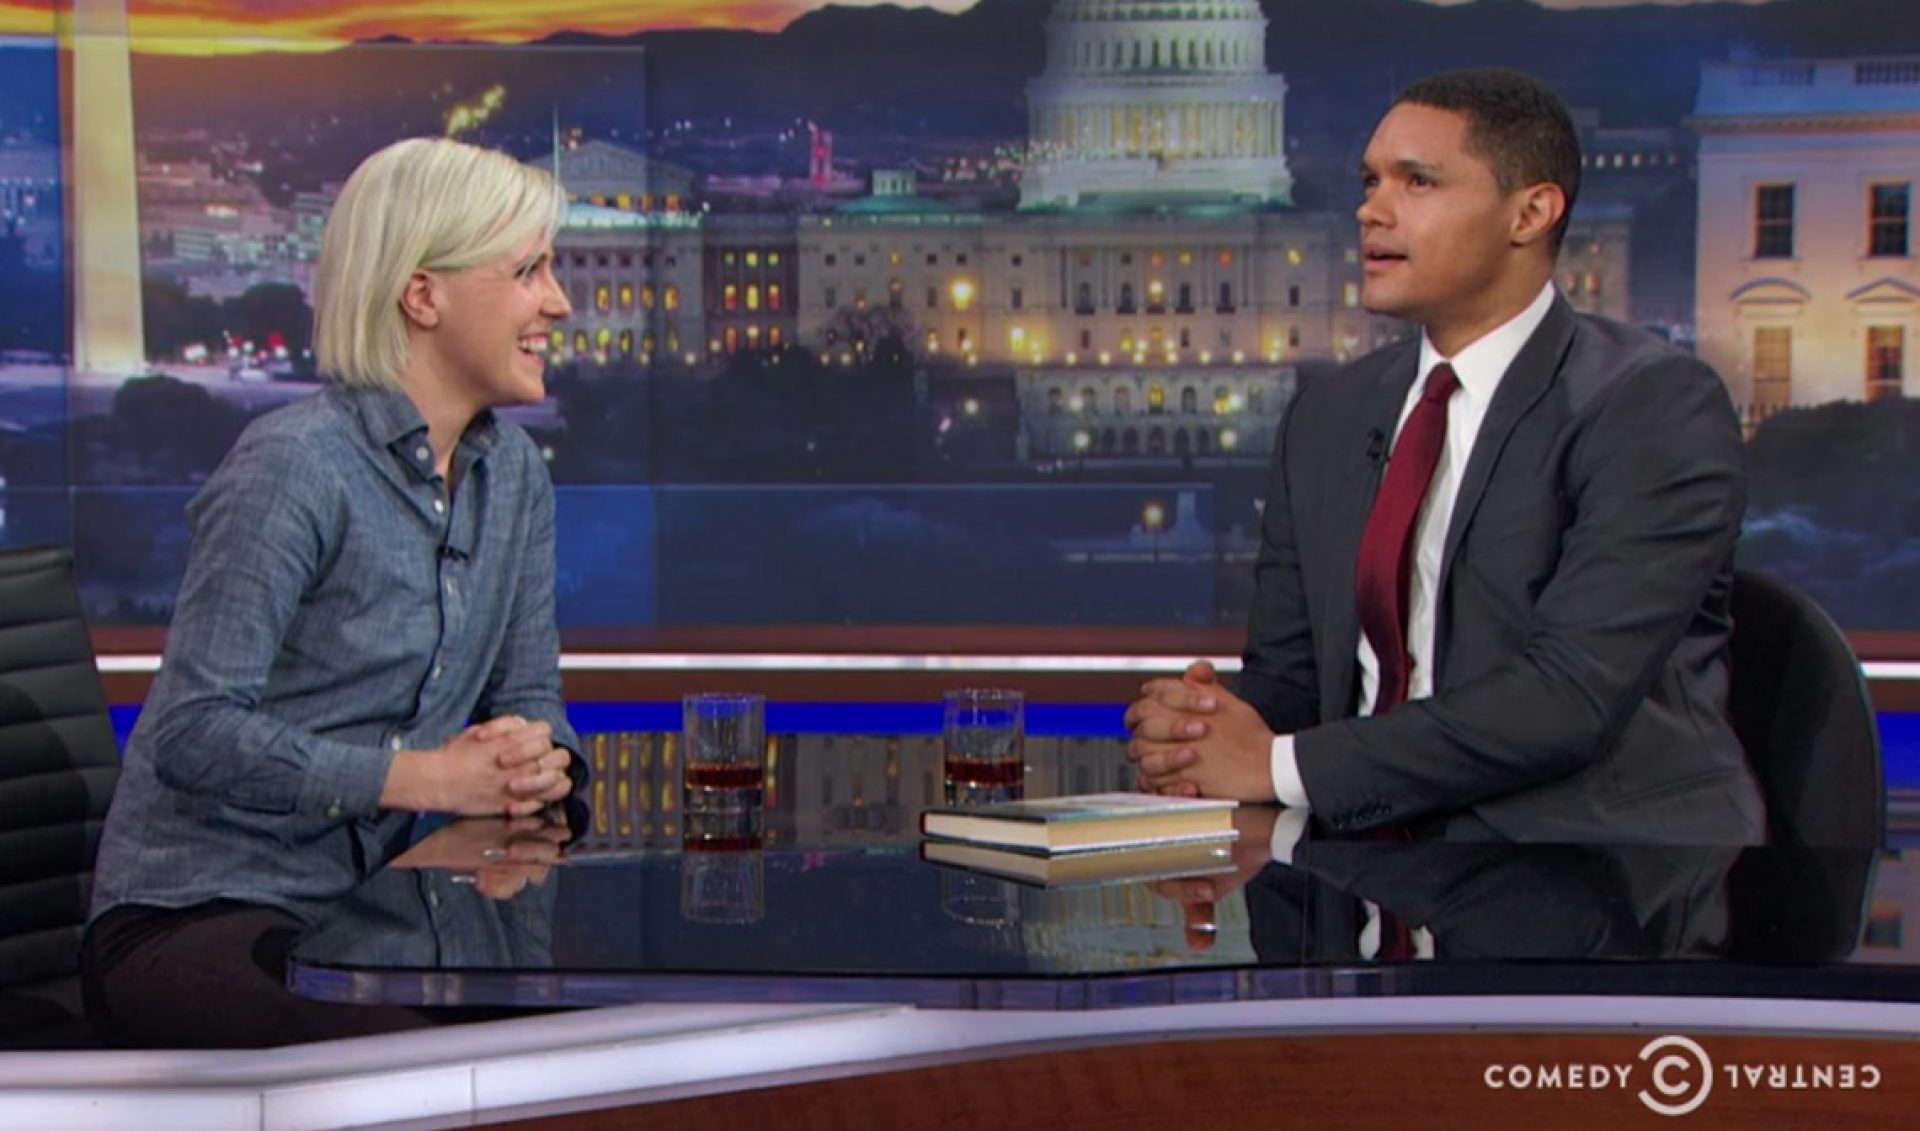 YouTube Star Hannah Hart Promotes Her New Movie On ‘The Daily Show’